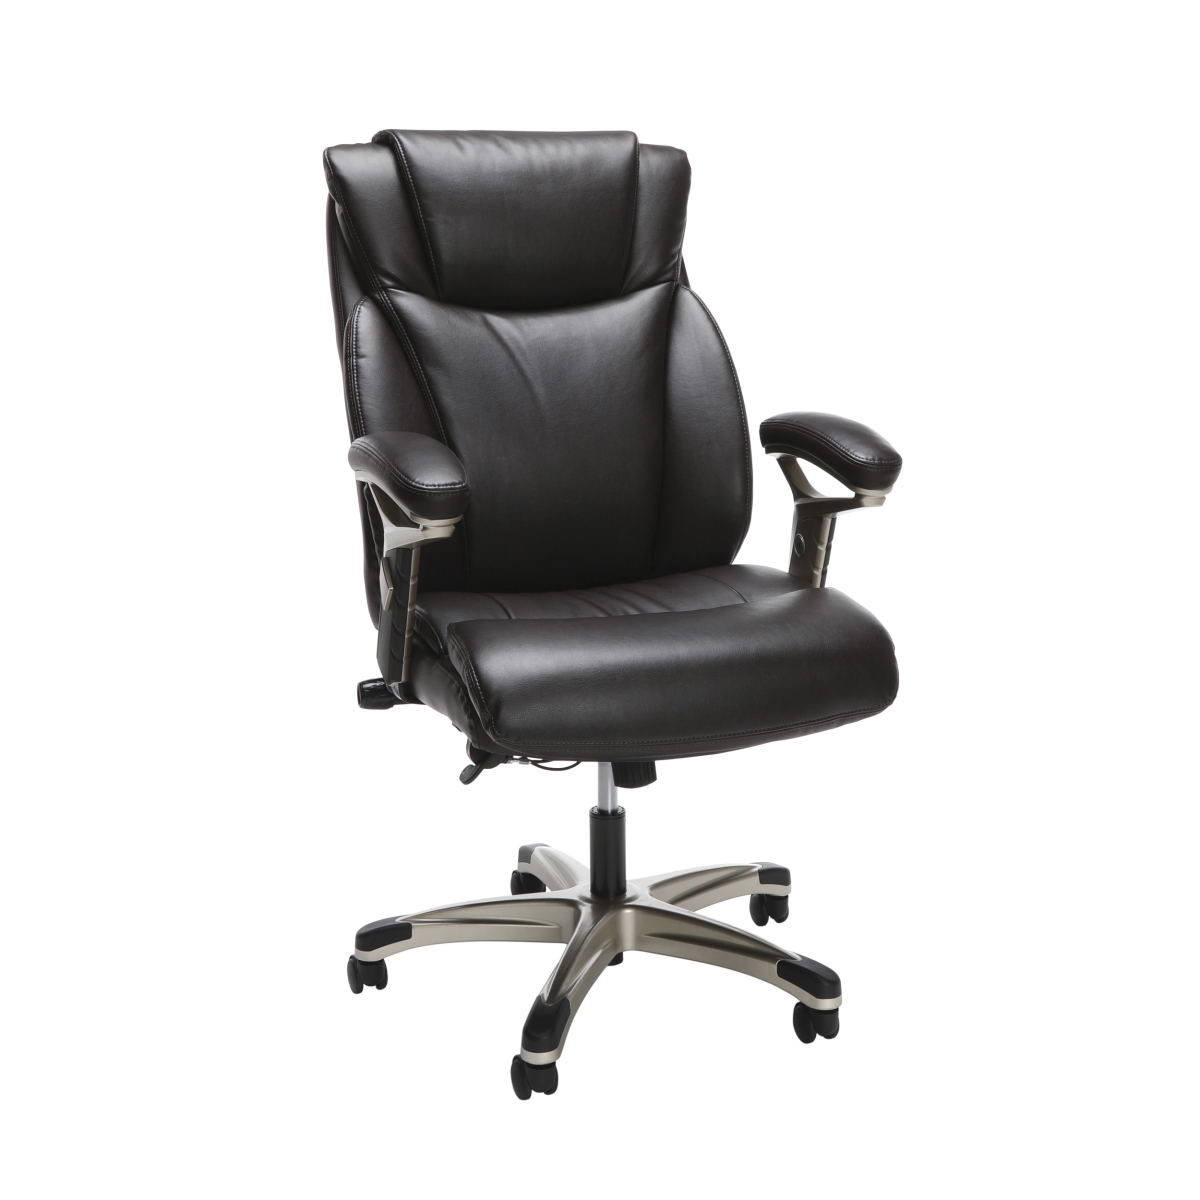 Ess-6046-brn Ergonomic Executive Bonded Leather Office Chair, Brown